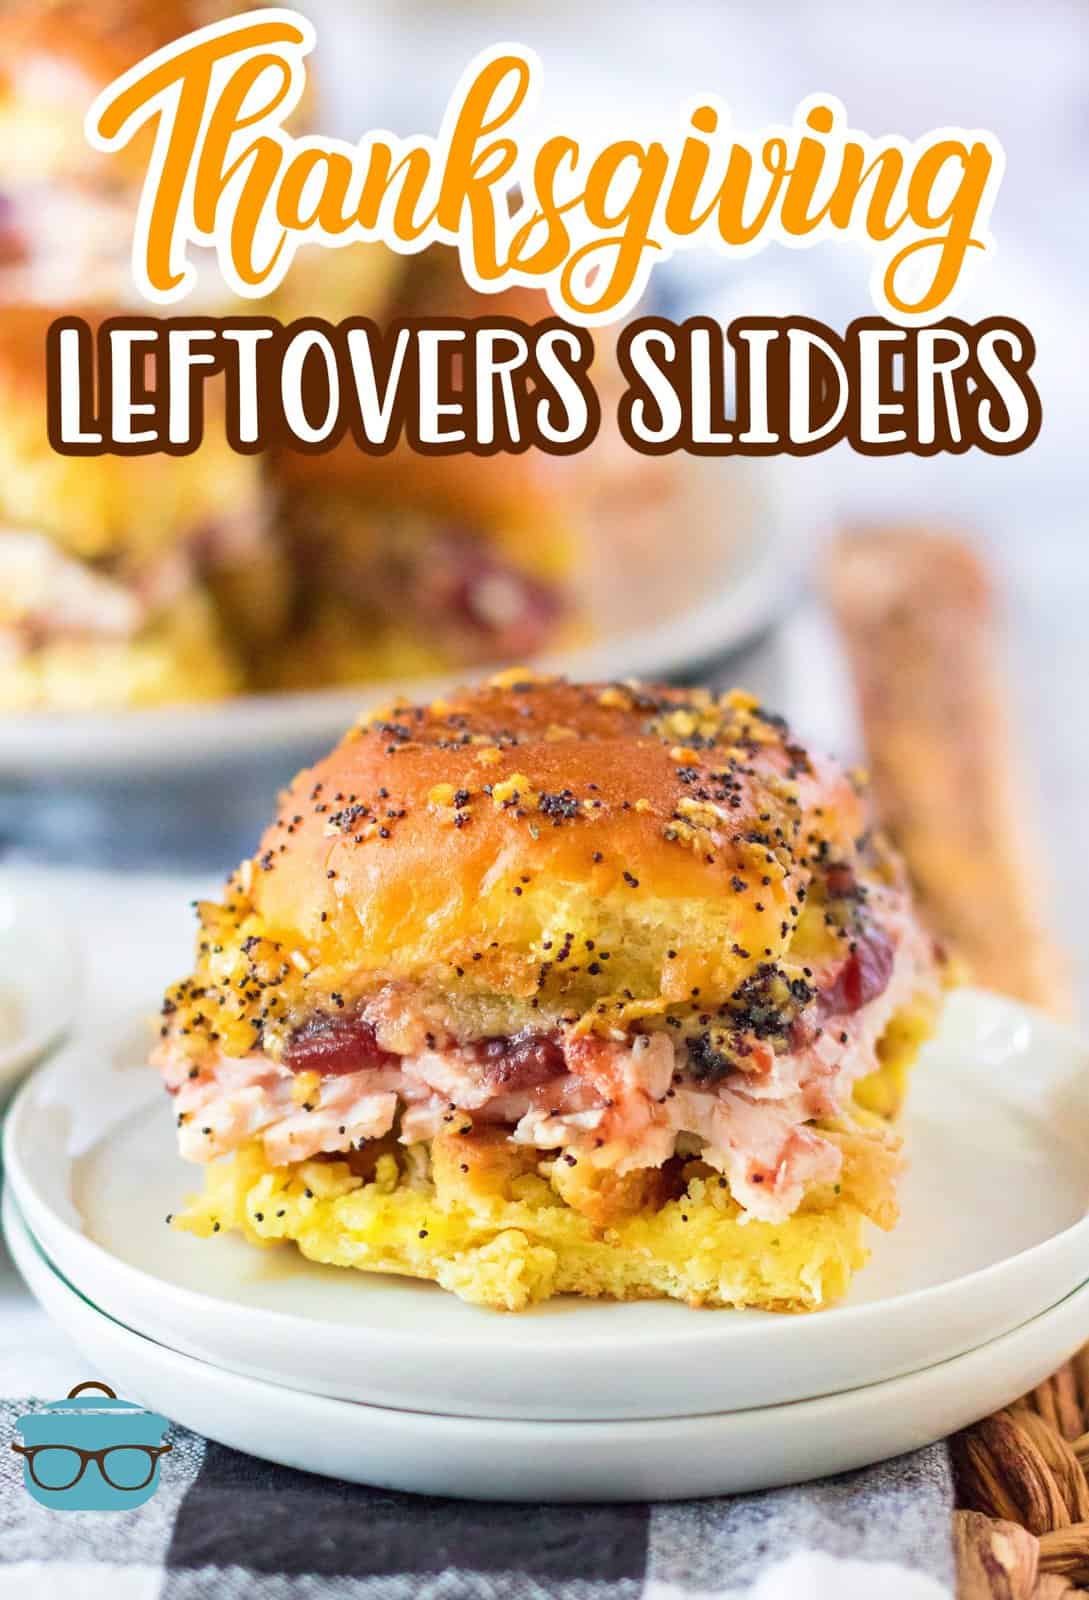 Pinterest image of one of the Thanksgiving Leftovers Turkey Sliders on plate showing the layers and glaze.